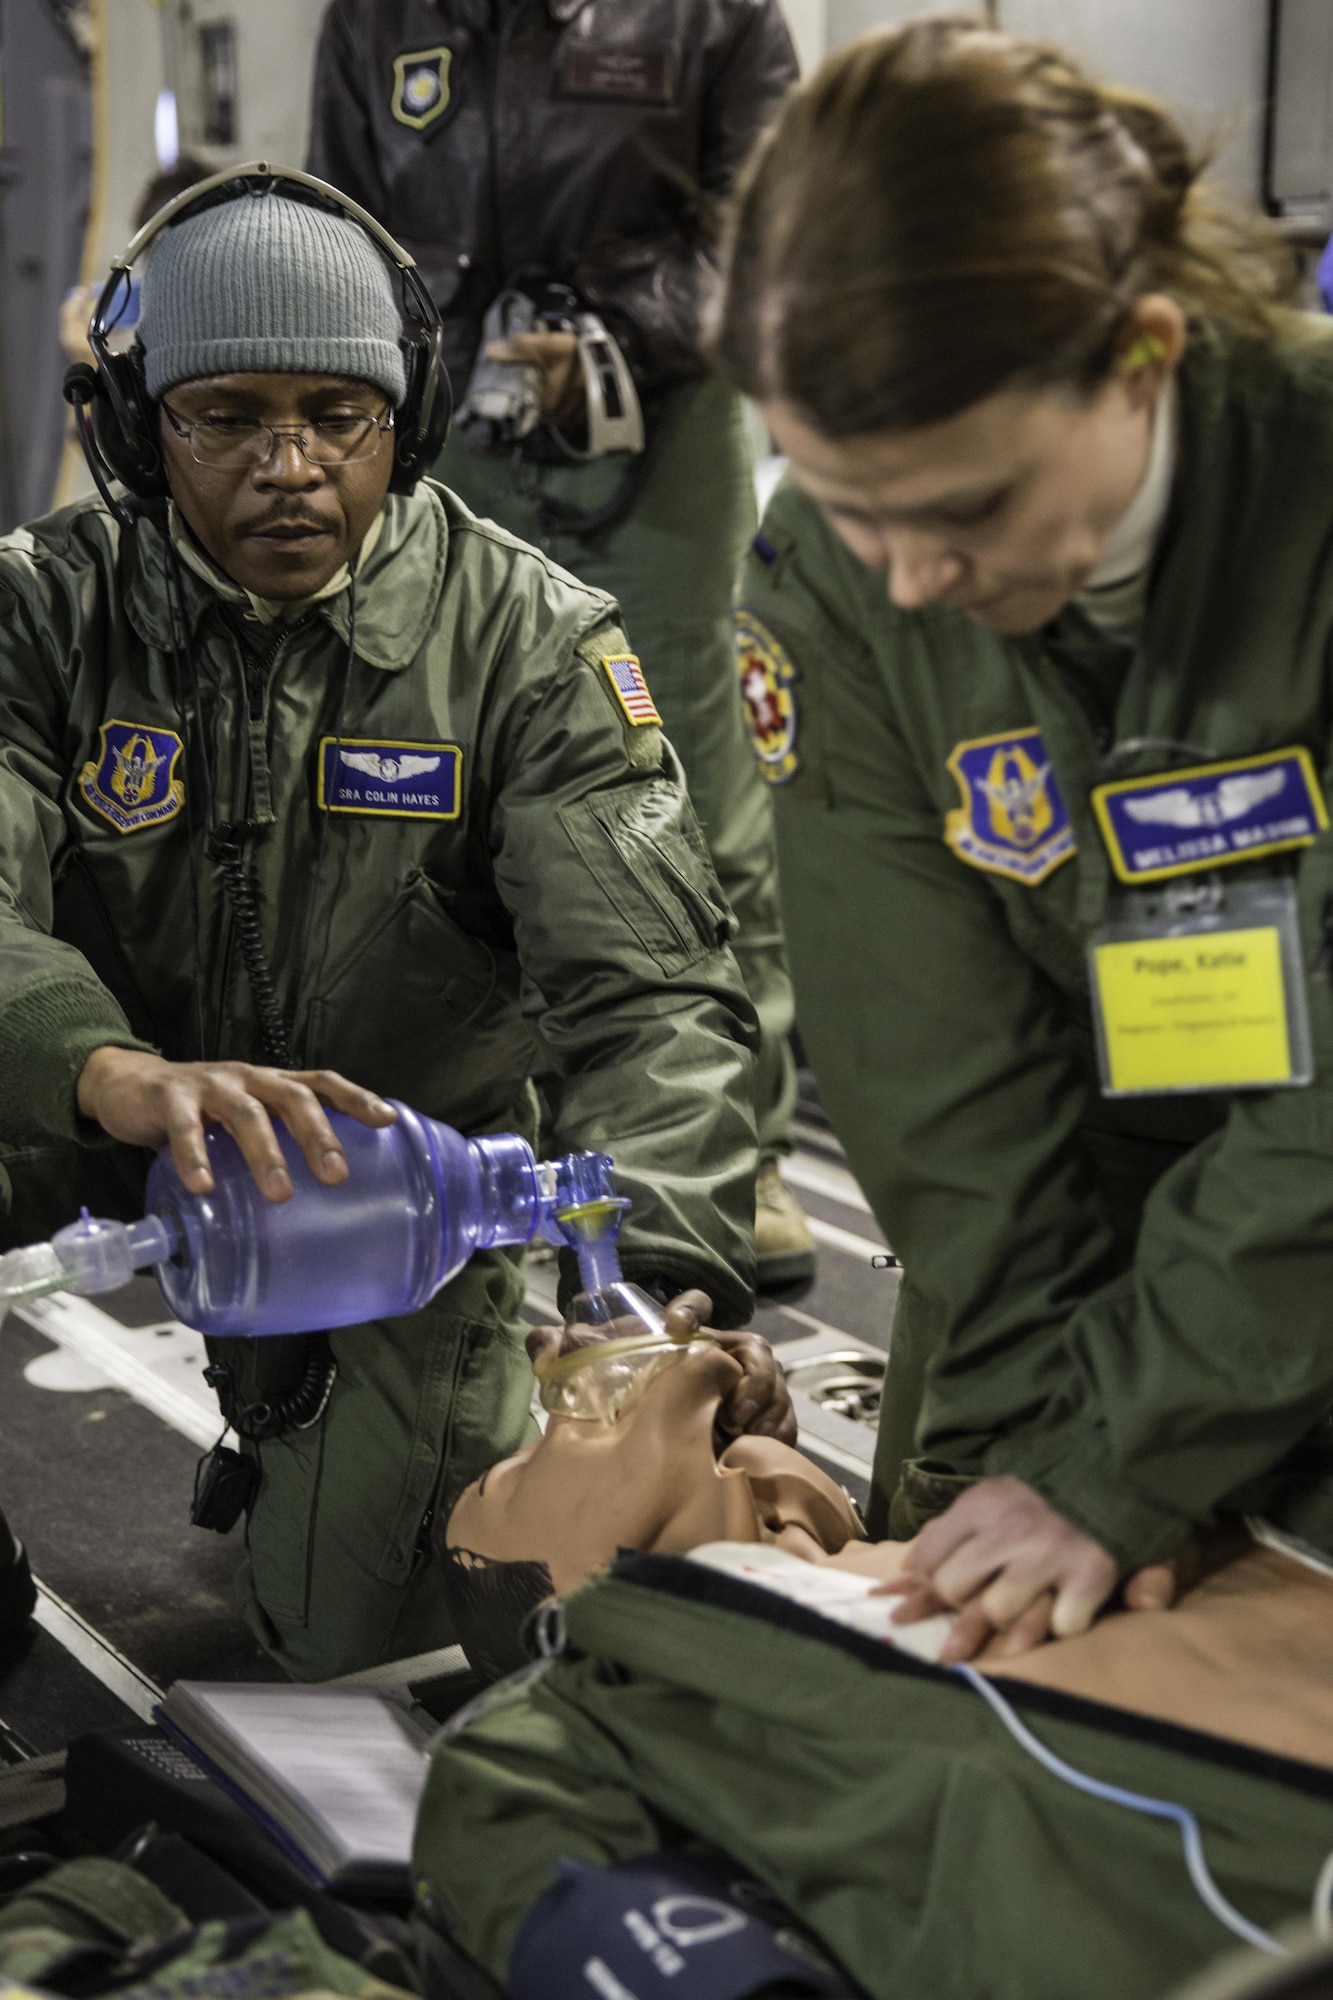 Senior Airman Colin Hayes and 1st Lt. Melissa Mason perform CPR on a mannequin Feb. 21, 2015 during a training mission in San Juan, Puerto Rico. The mission was part of a three day fly-away with Airmen from the 315th Airlift Wing at Joint Base Charleston, South Carolina and aeromedical Airmen from the 459th Air Refueling Wing at Joint Base Andrews, Maryland. The training mission was a cost-effective means to accomplish currency items and evaluations for flight crew members and provided C-17 familiarization and proficiency training for aeromedical Airmen. Hayes is an aeromedical technician and Mason is a flight nurse. Both are assigned to the 459th Aeromedical Evacuation Squadron. (U.S. Air Force Photo/Tech. Sgt. Shane Ellis)
